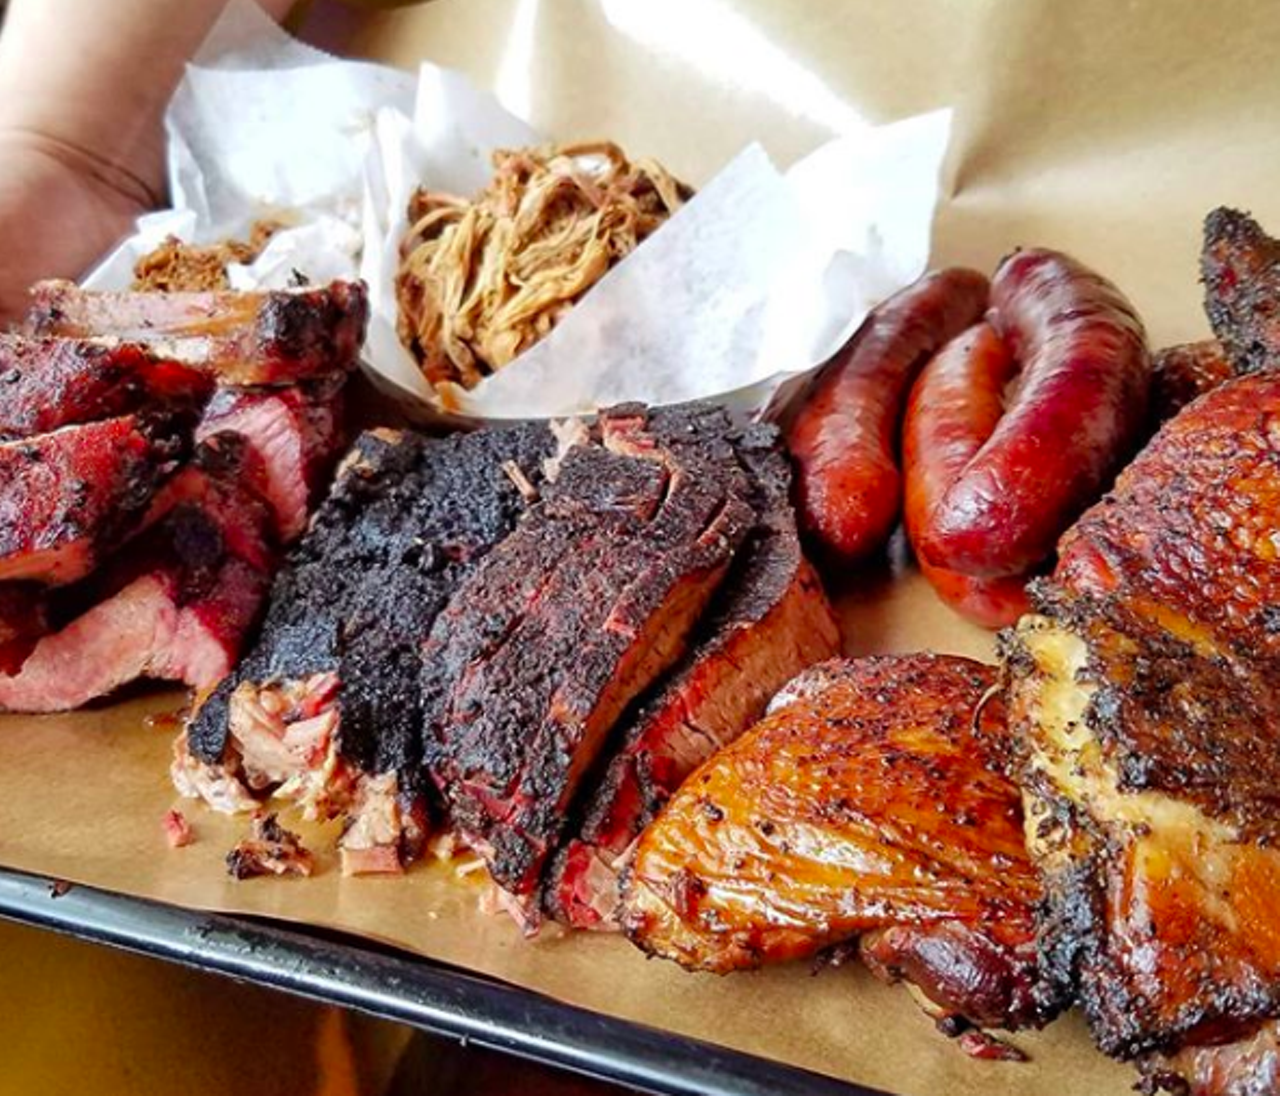 Two Bros. BBQ Market
12656 West Avenue, (210) 496-0222, twobrosbbqmarket.com
It’s safe to say that all of Chef Jason Dady’s restaurants got national attention when he appeared on Top Chef: Texas in 2011 and Iron Chef Gauntlet in 2017. Dady’s cherry-glazed baby back ribs have especially gotten attention as they’ve been featured on the Food Network’s site, too.
Photo via Instagram / s.a.vory